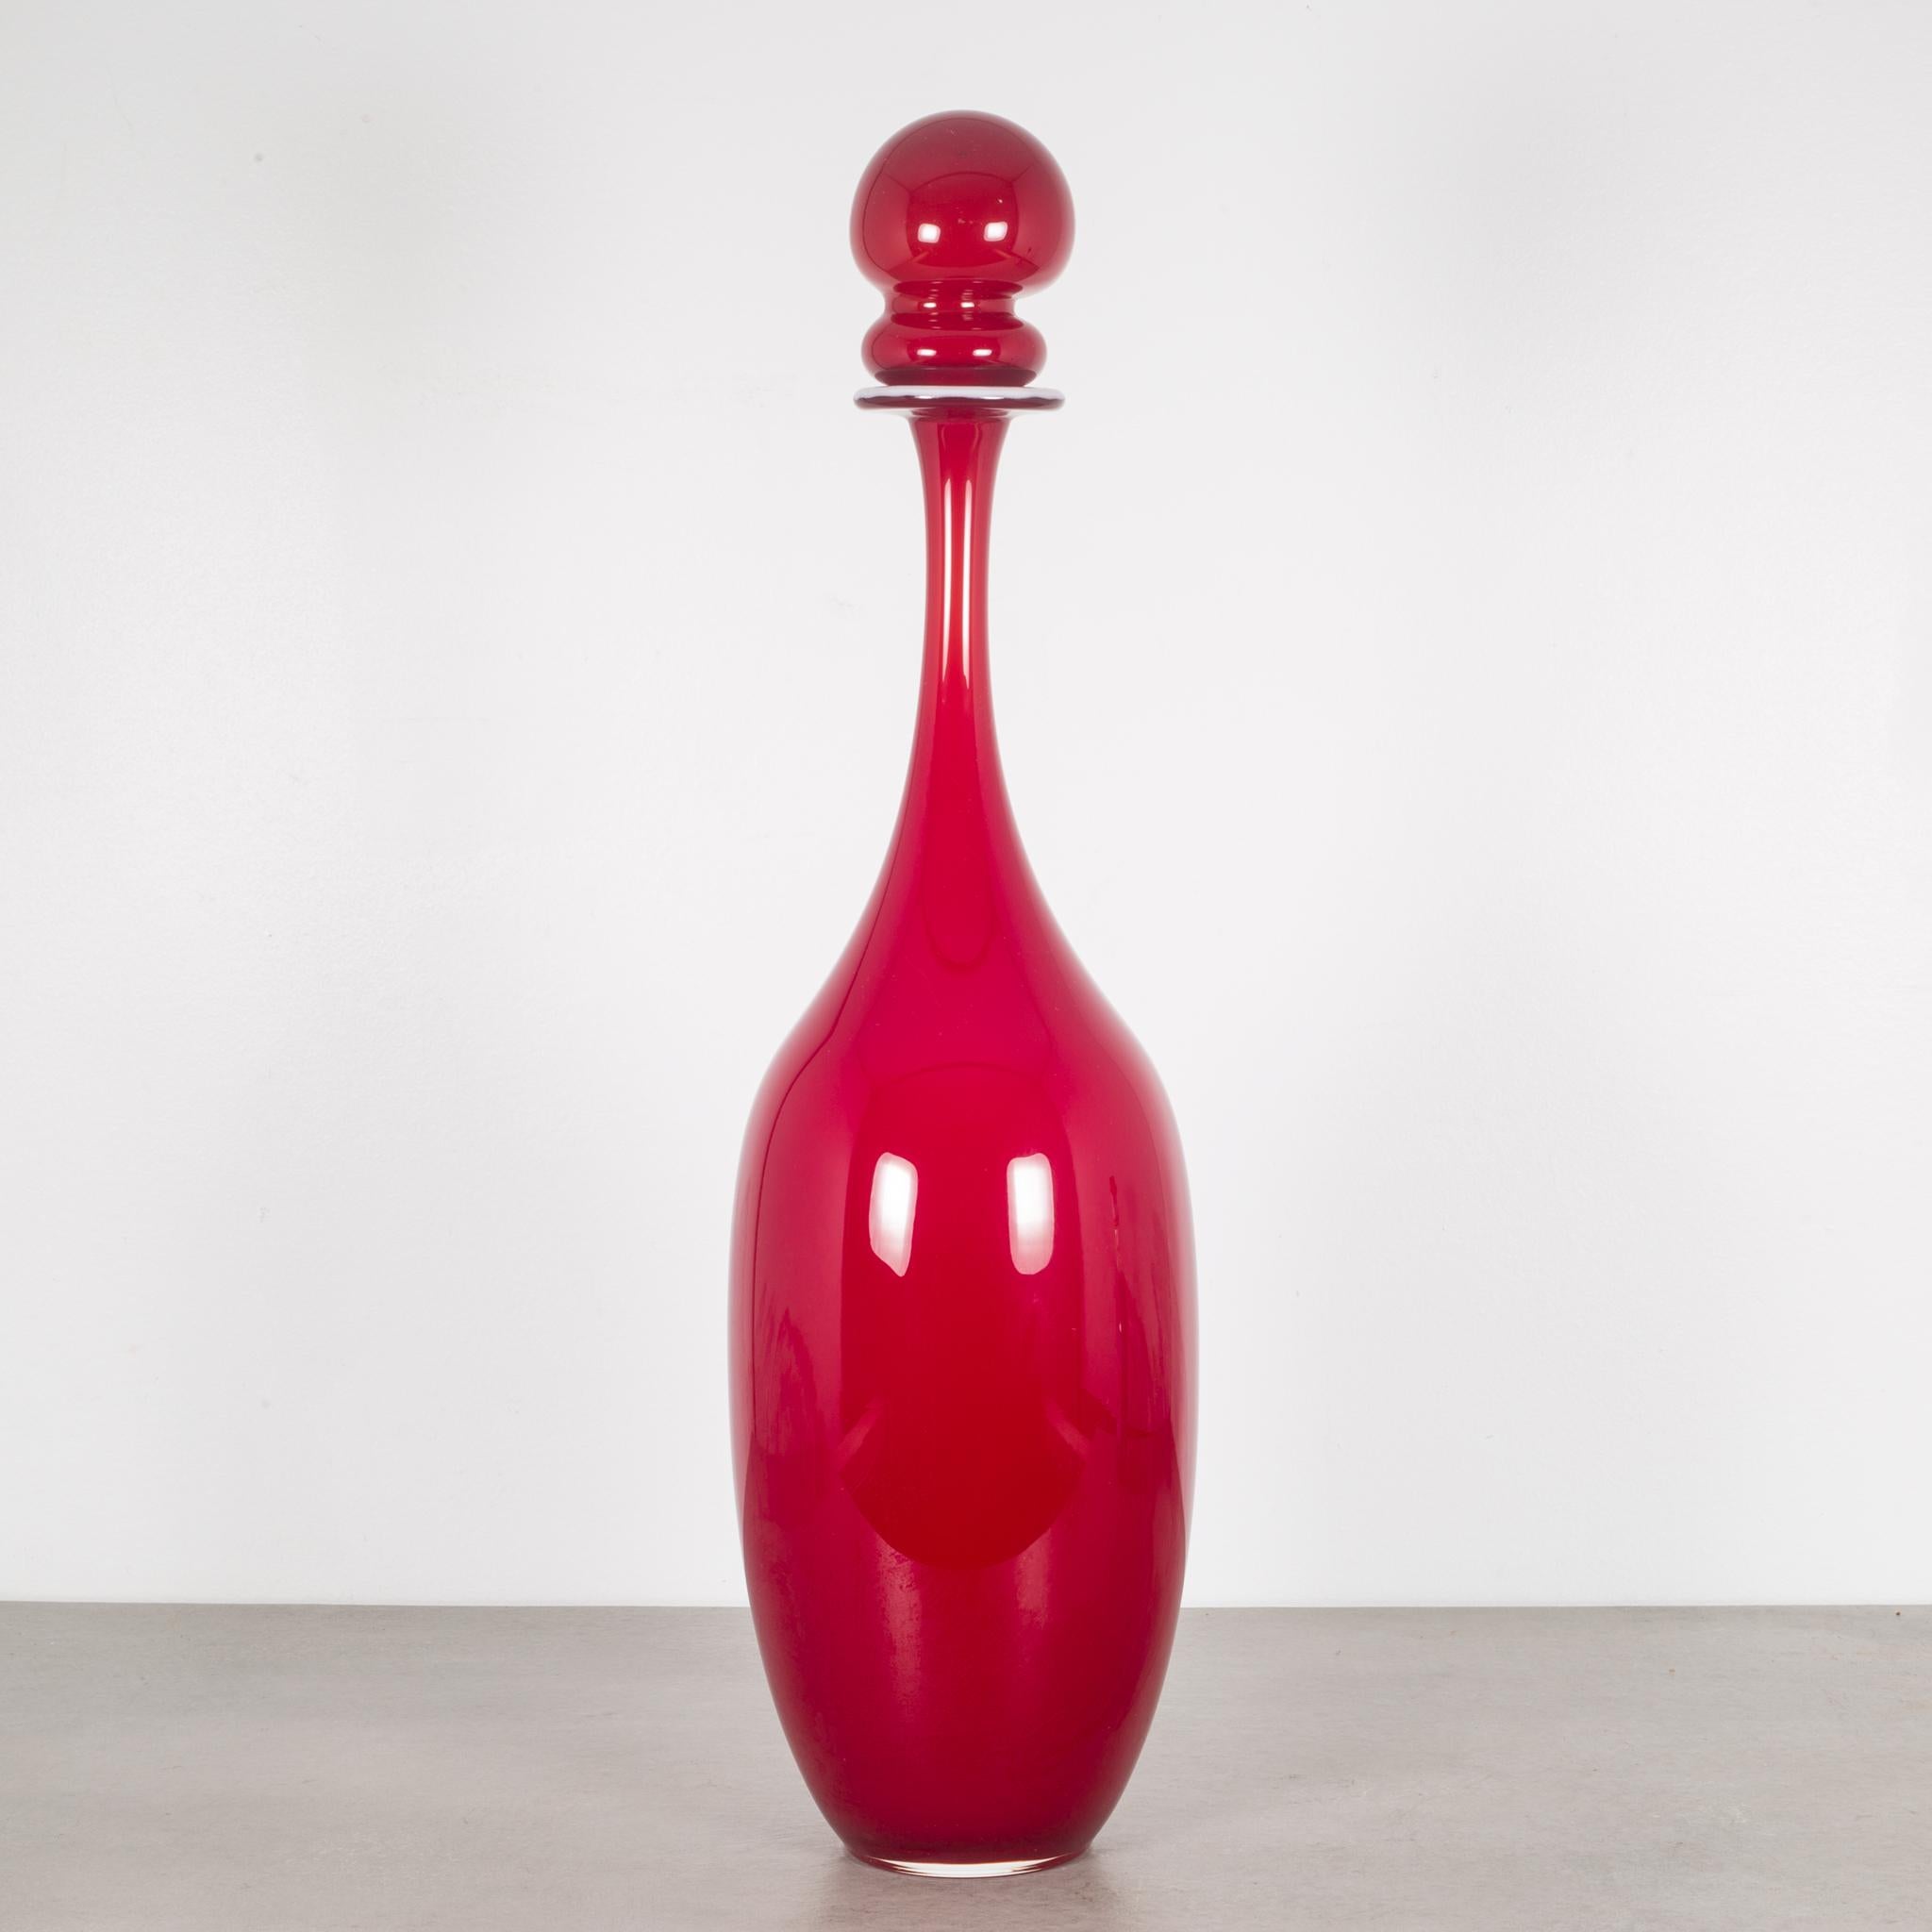 About

This is a hand blown Murano glass decanter originally sold by Seguso Ca d'oro. This piece has retained its original finish.

Creator: Murano, made in Italy.
Date of manufacture: circa 2010.
Materials and techniques: Hand blown